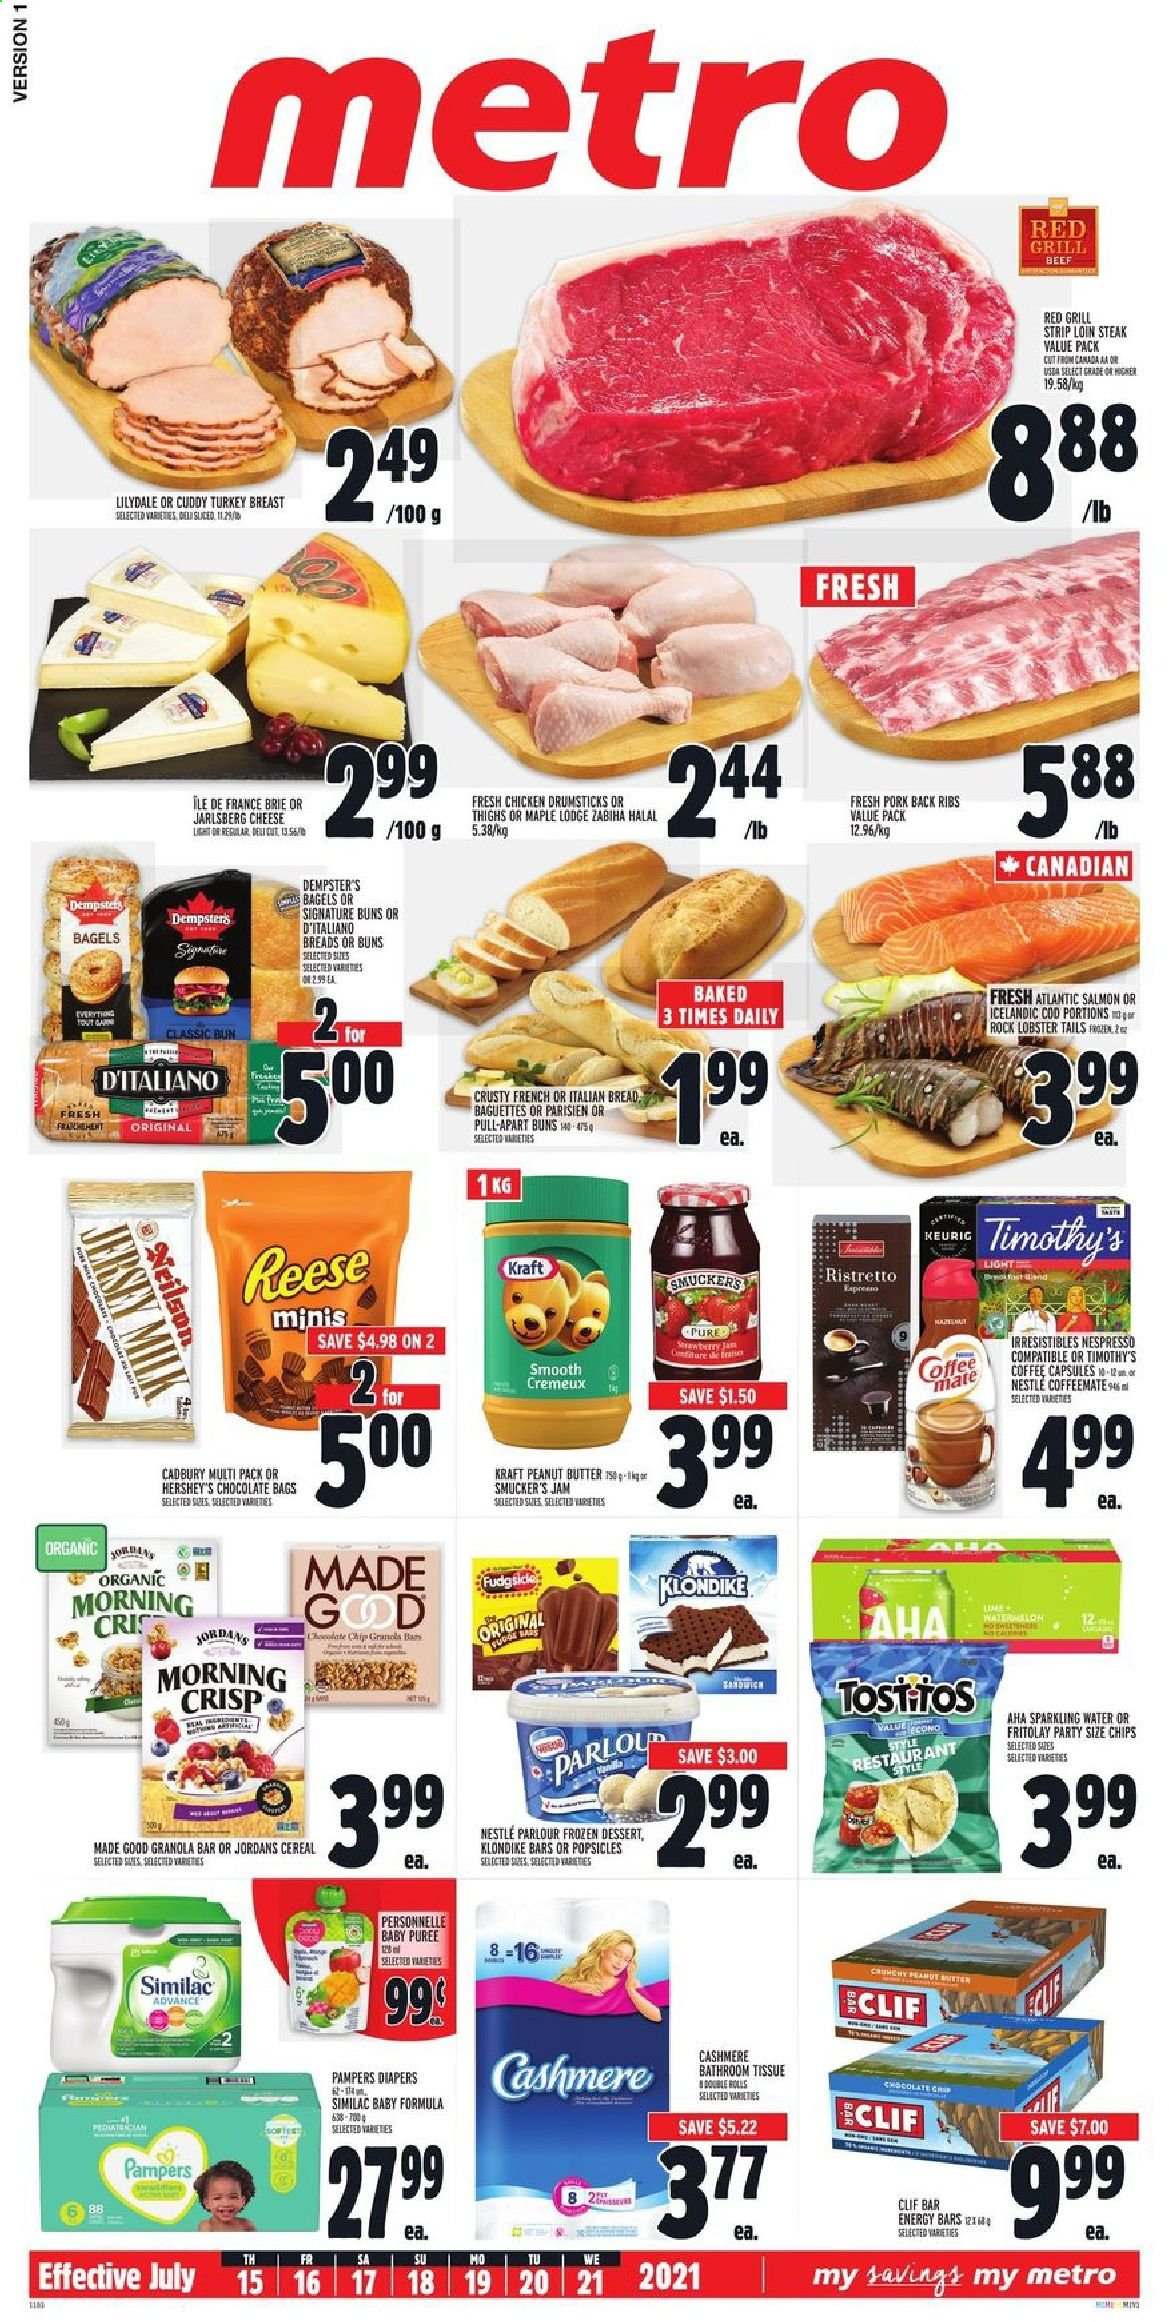 thumbnail - Metro Flyer - July 15, 2021 - July 21, 2021 - Sales products - bagels, buns, cod, lobster, salmon, lobster tail, Kraft®, cheese, brie, milk, Hershey's, Nestlé, chocolate, Cadbury, Frito-Lay, cereals, granola bar, energy bar, fruit jam, peanut butter, sparkling water, coffee, Nespresso, coffee capsules, Keurig, Similac, turkey breast, chicken drumsticks, chicken, turkey, pork meat, pork ribs, pork back ribs, nappies, bath tissue. Page 1.